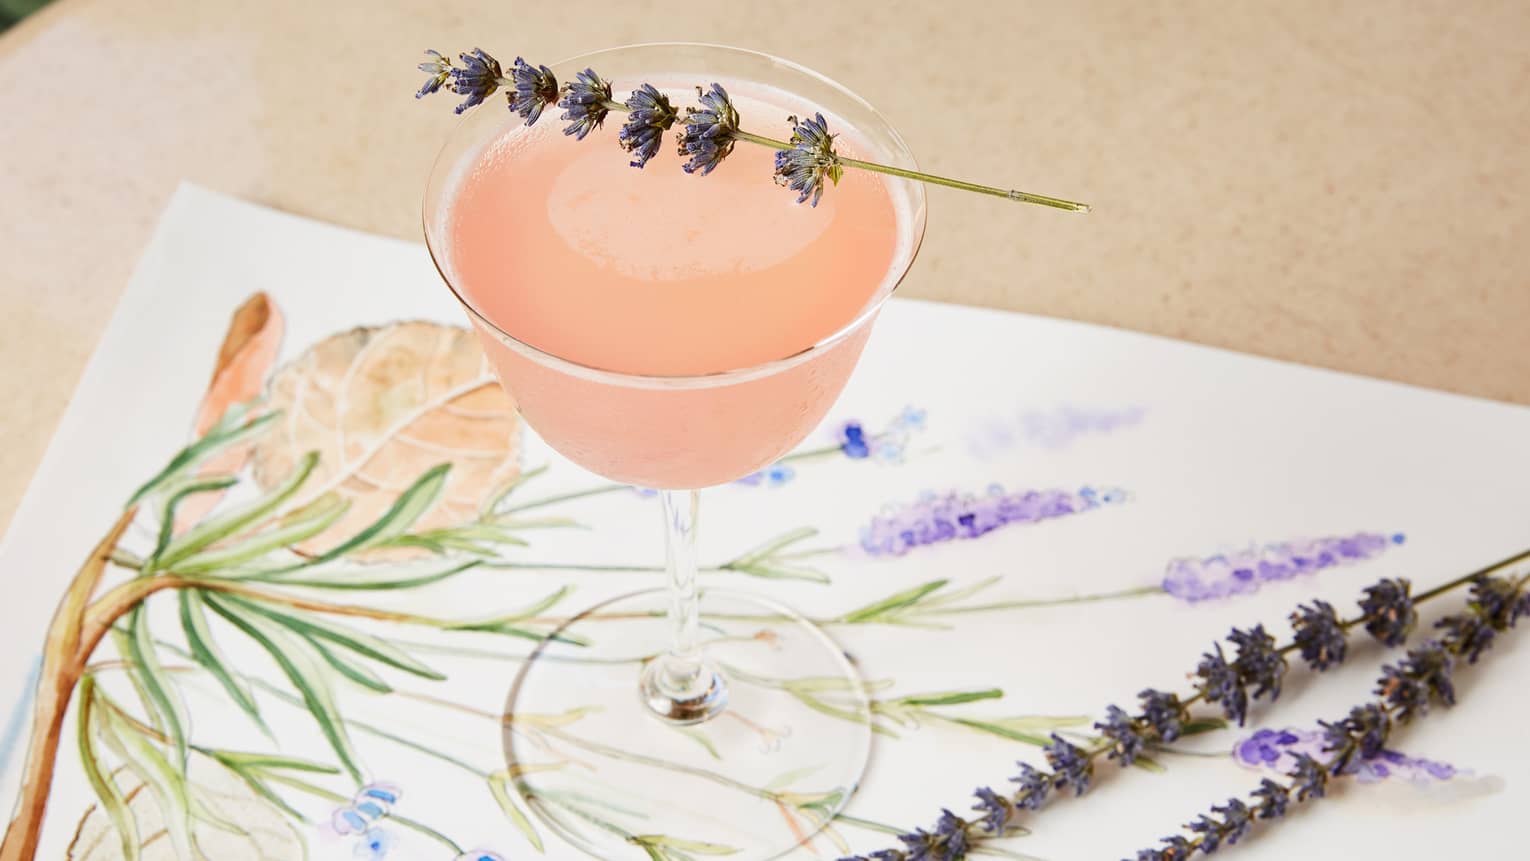 Sprig of dried lavendar on pink martini in glass sitting on floral watercolour painting